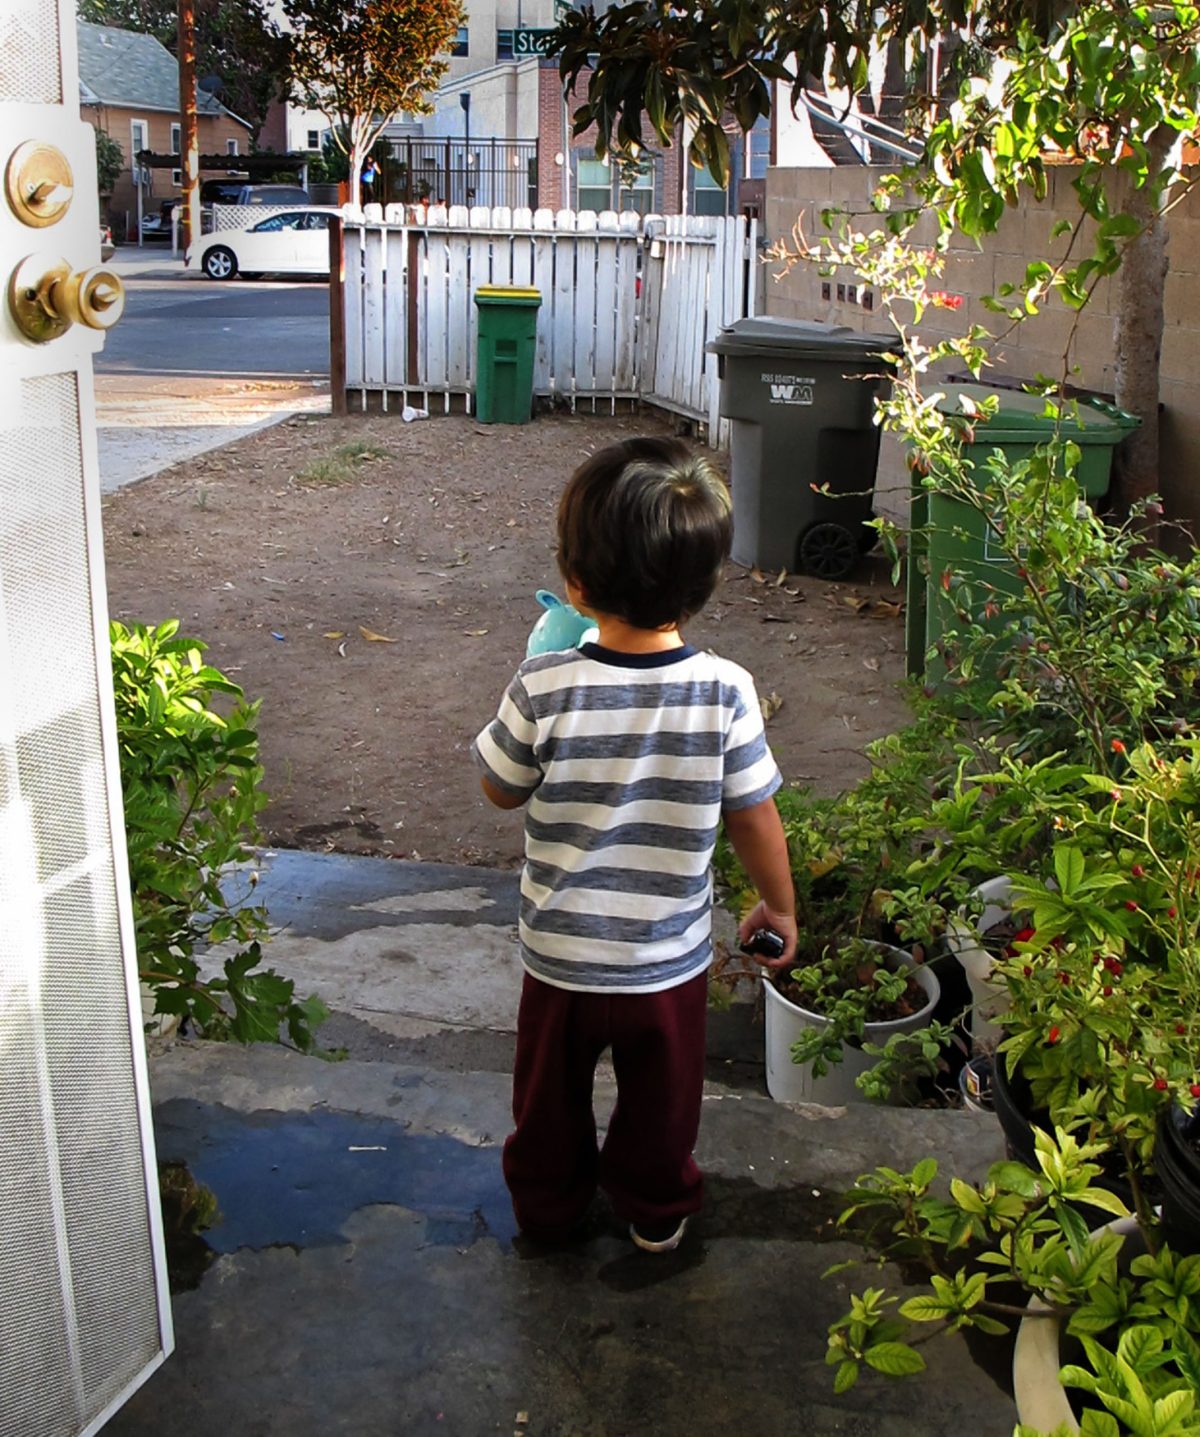 The view from behind 2-year-old Nalleli Garrido's as he looks out on his porch.